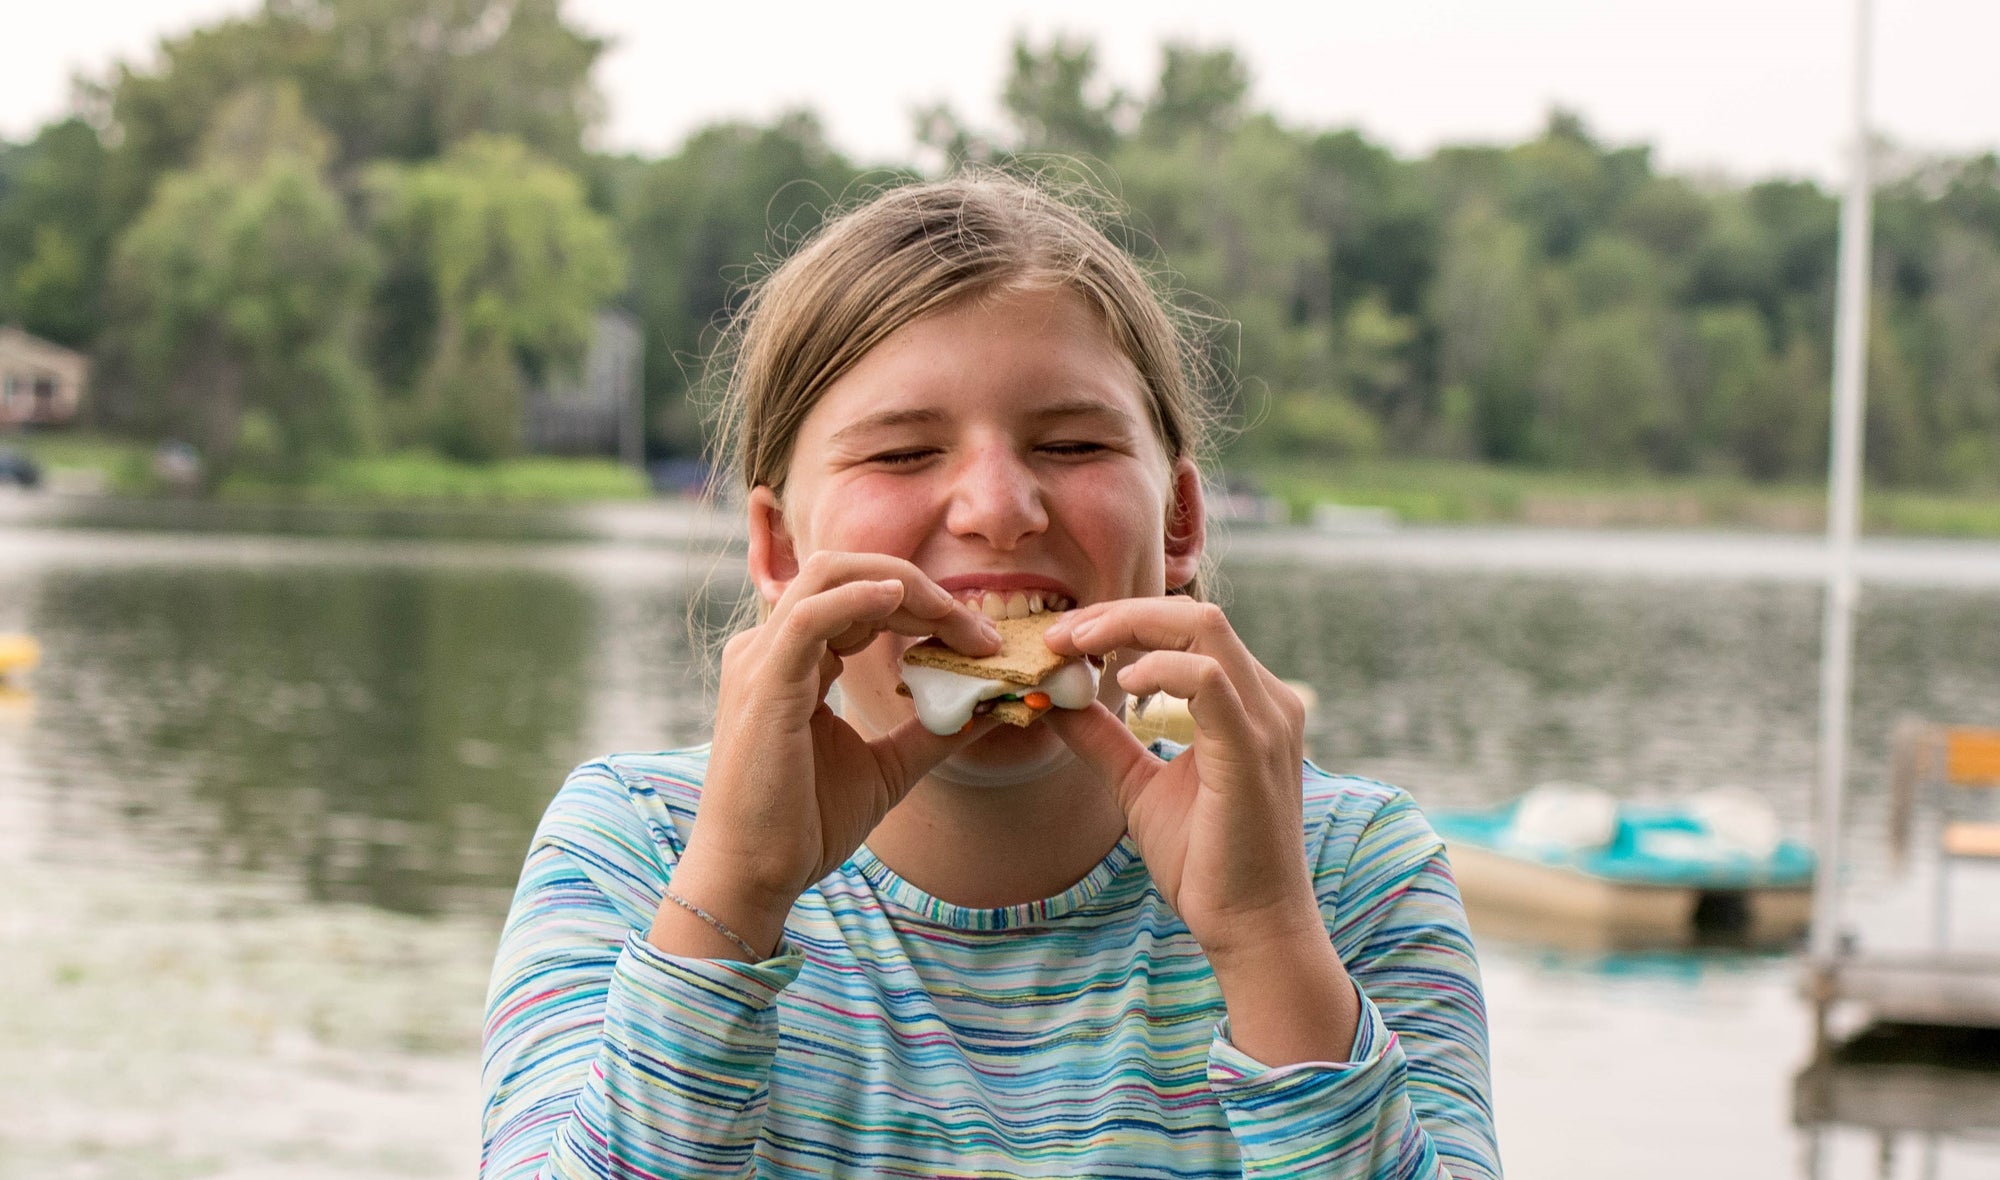 A girl takes a bite out of a smore. Campfire recipes shared by Pear & Simple, a gift boutique in Port Washington, WI.